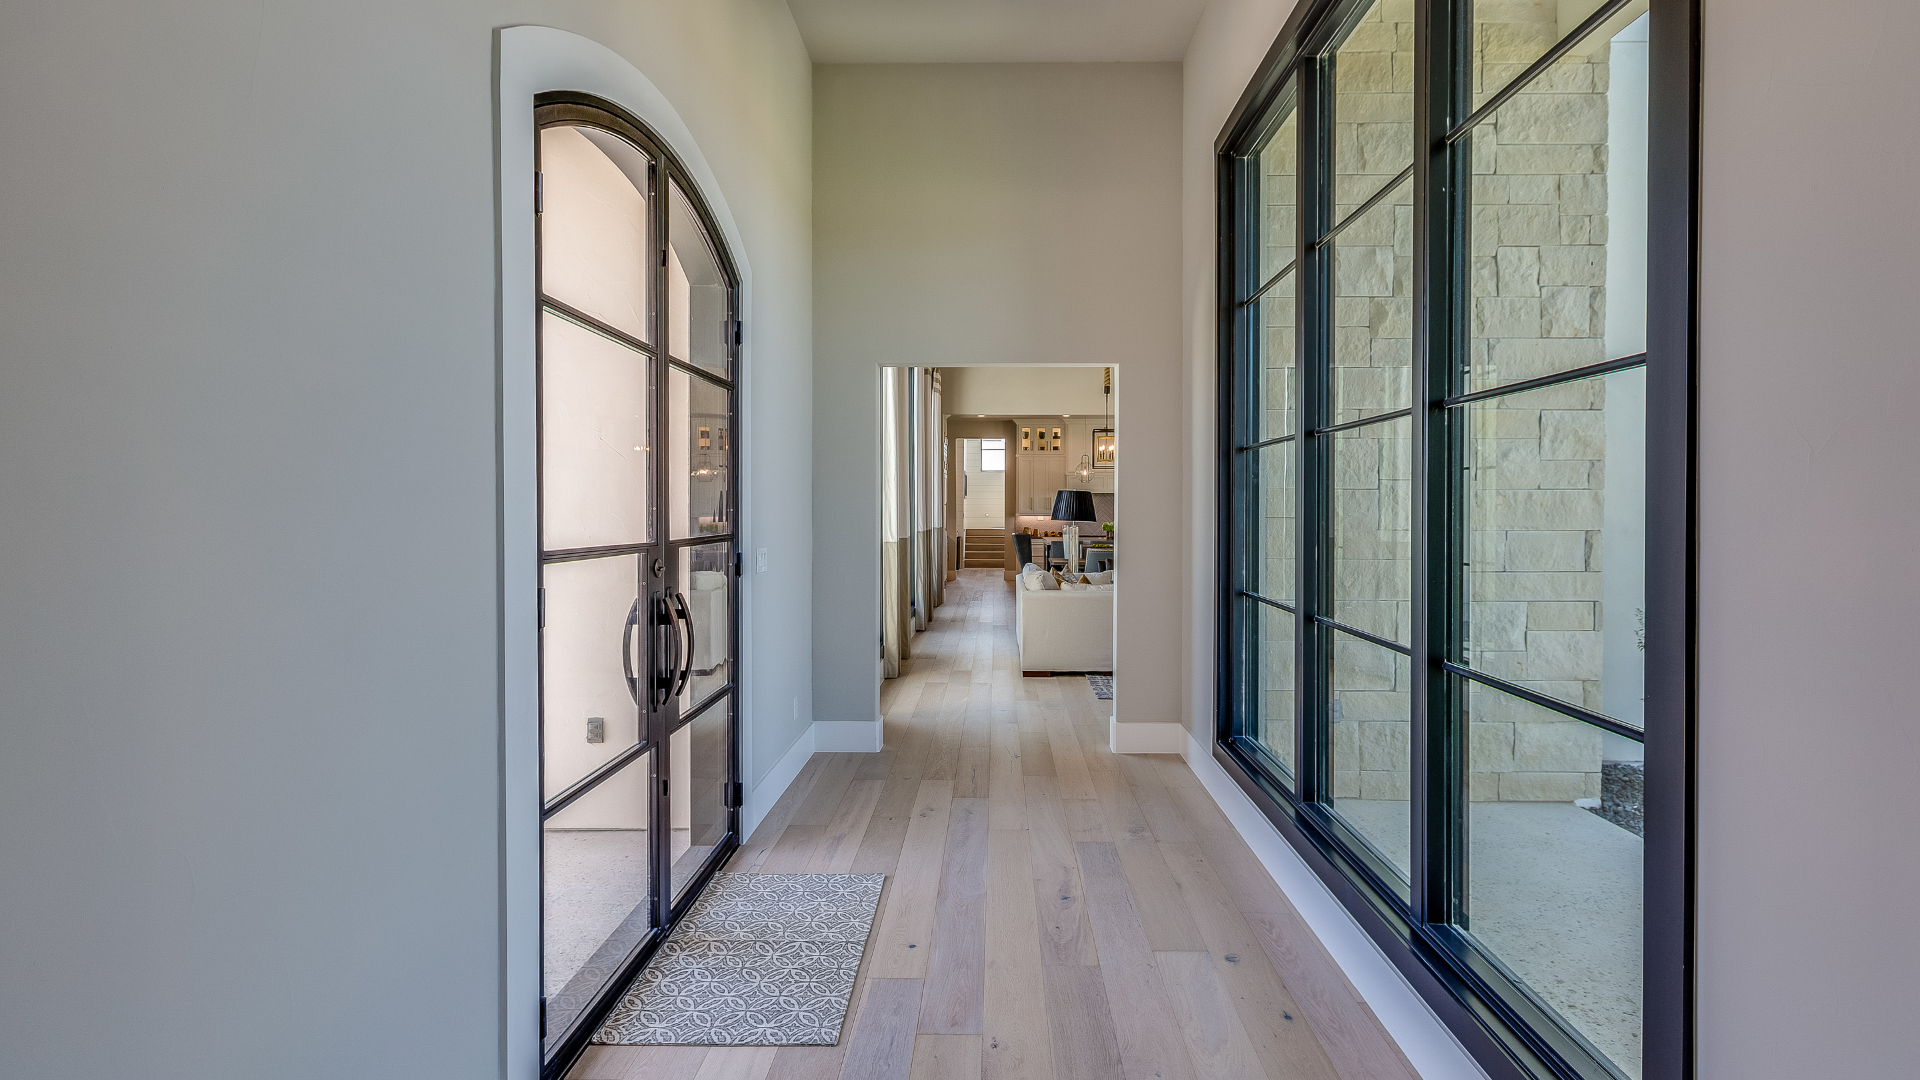 Hallway with wood flooring and French doors